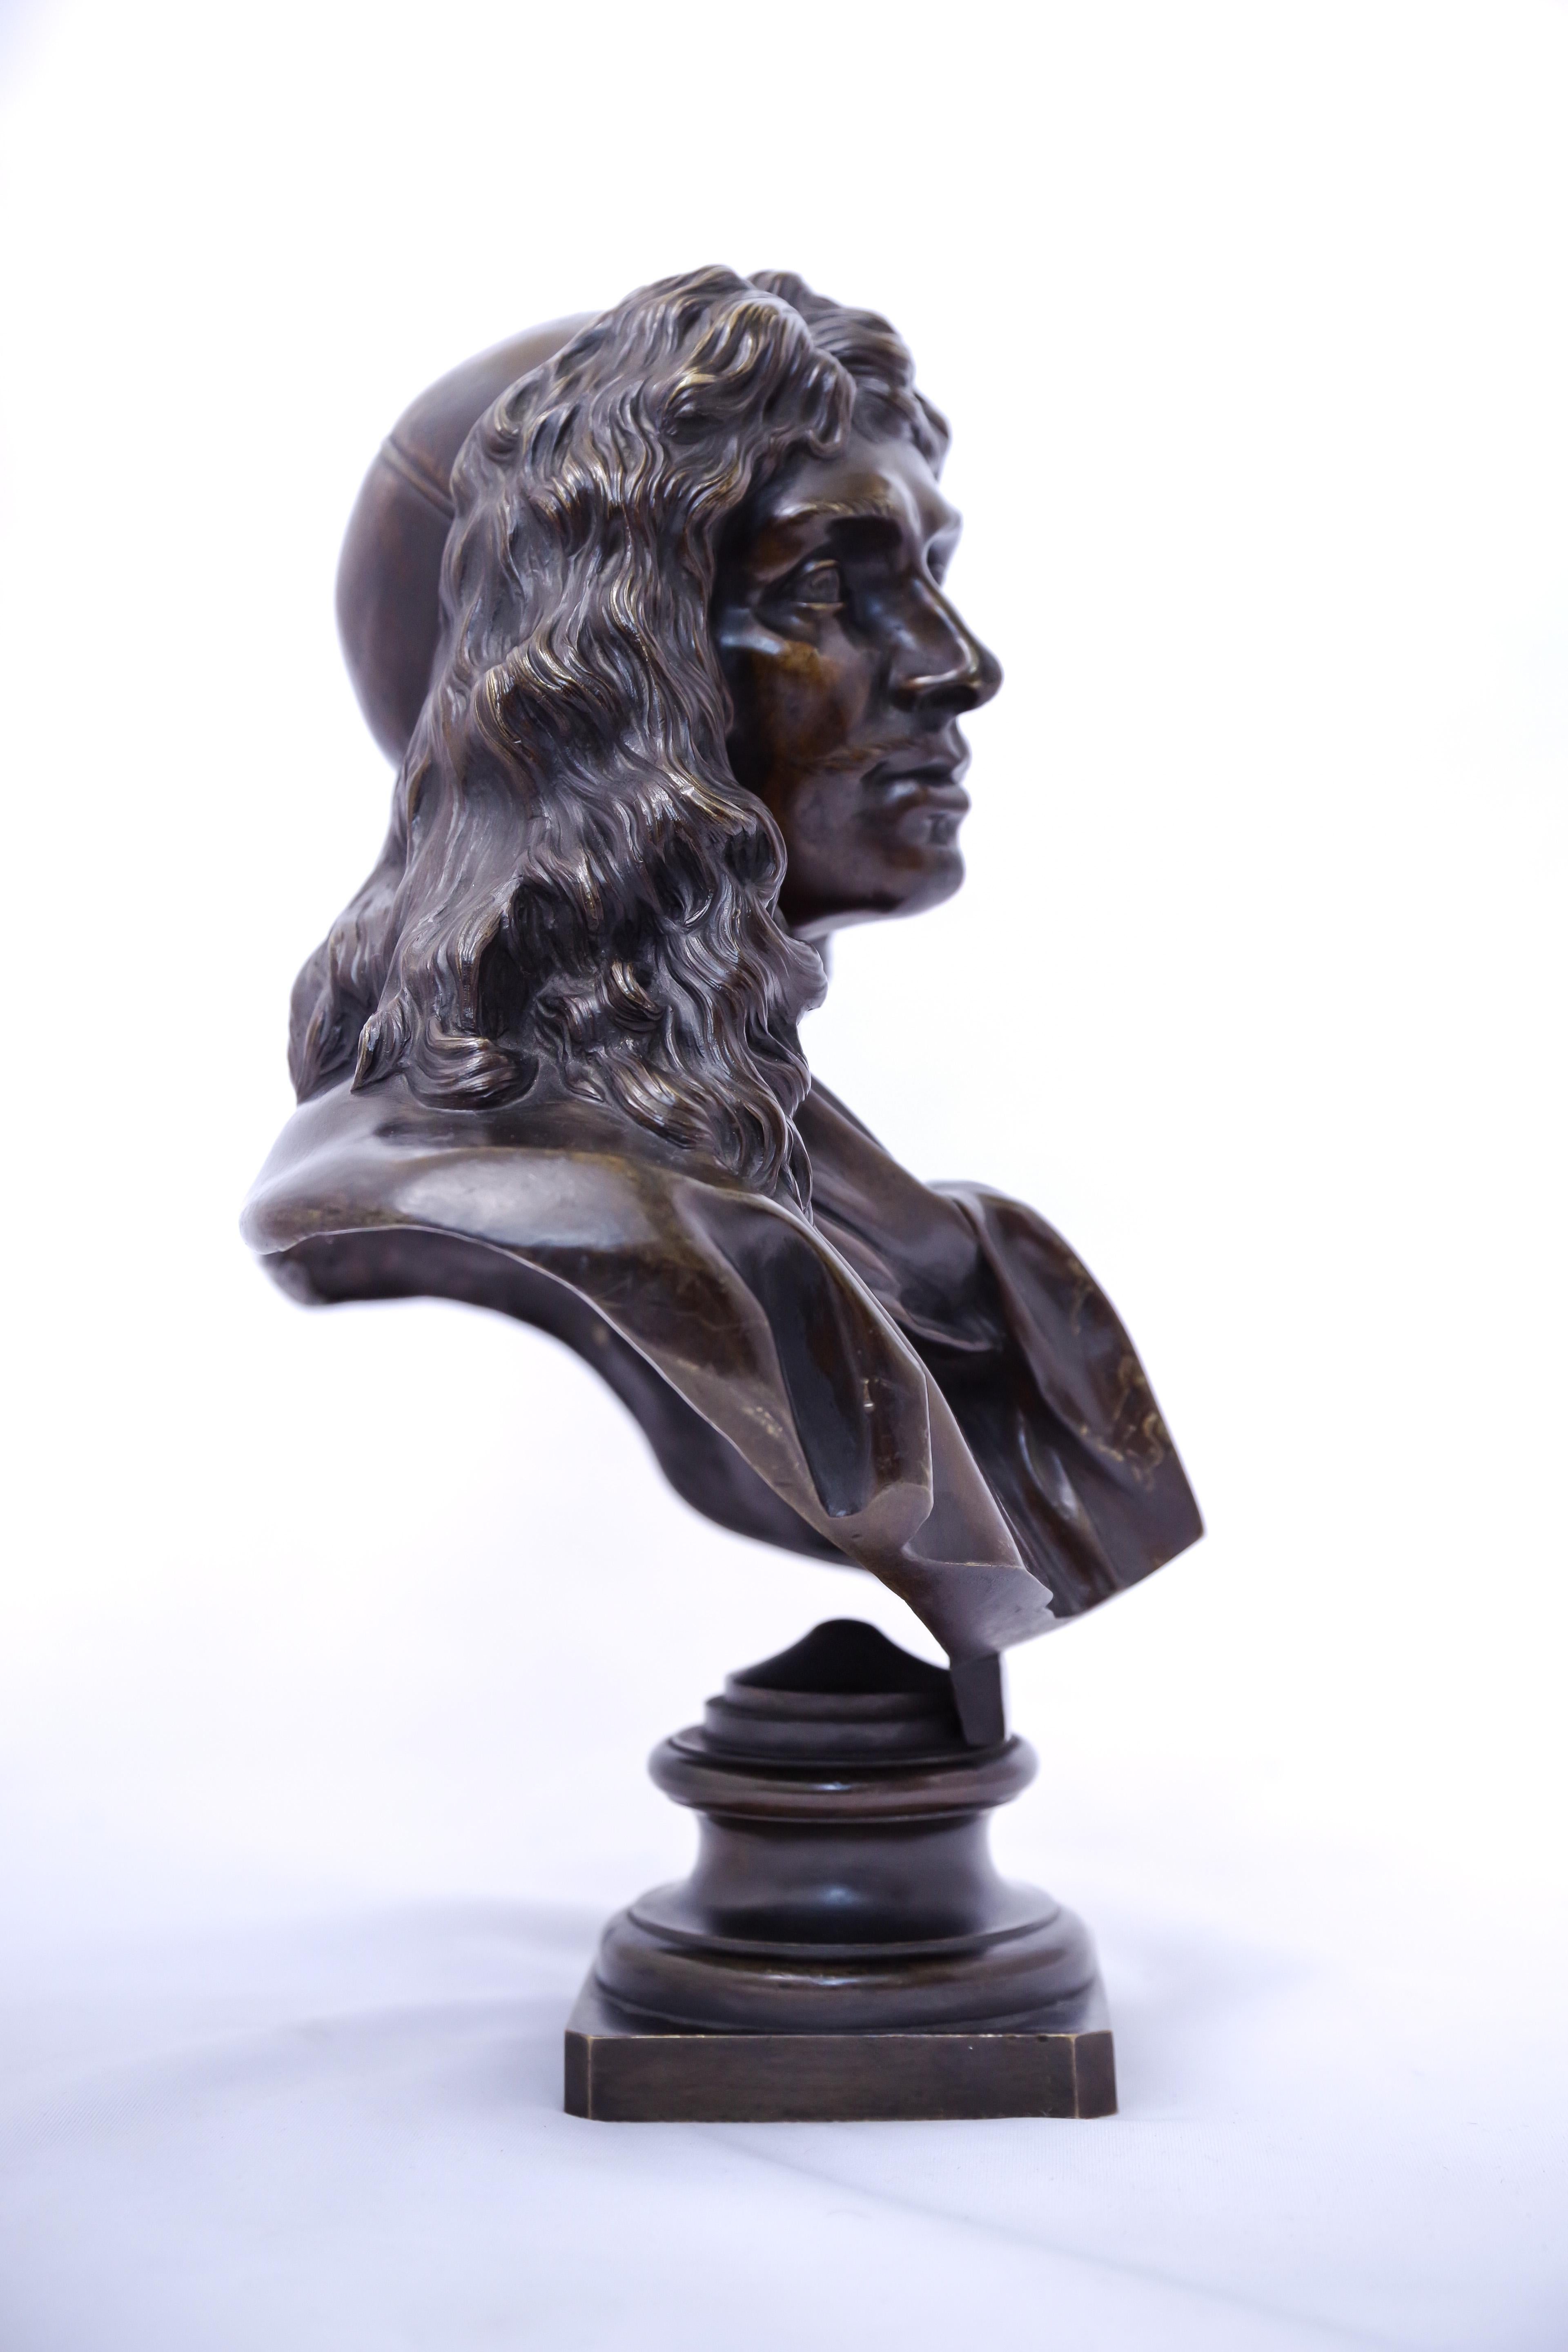 Houdin’s expressive yet classically poised bust of the 17th-century French playwright, originally in marble, has been finely cast and worked by the the Parisian bronze foundry Barbedienne. The cast probably dates from the late 19th century. It’s